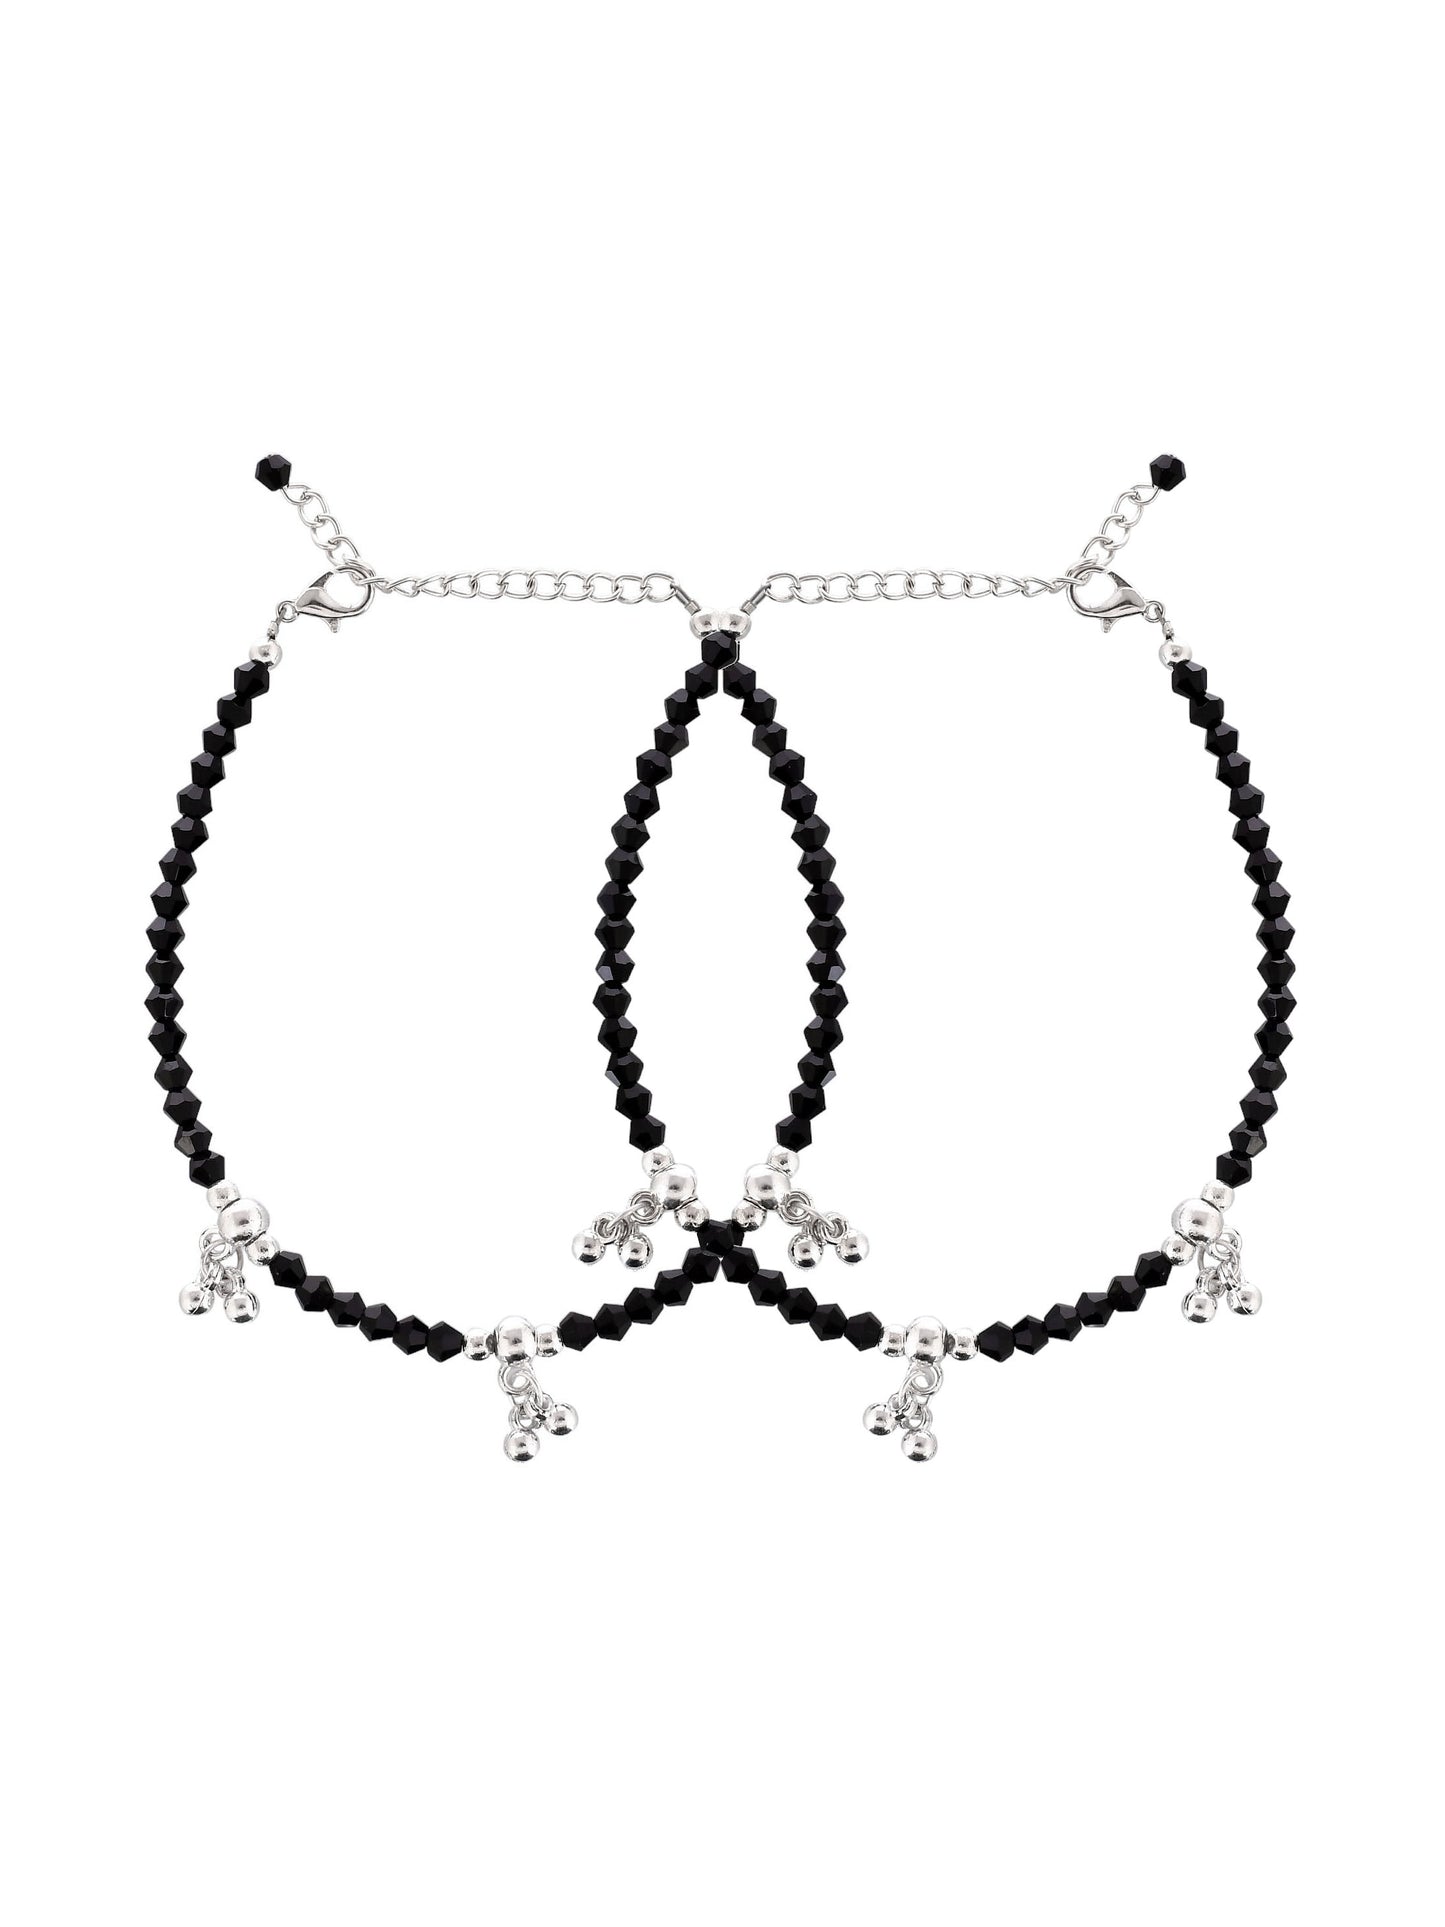 silver pearls Studded Black beads chain anklet for womens